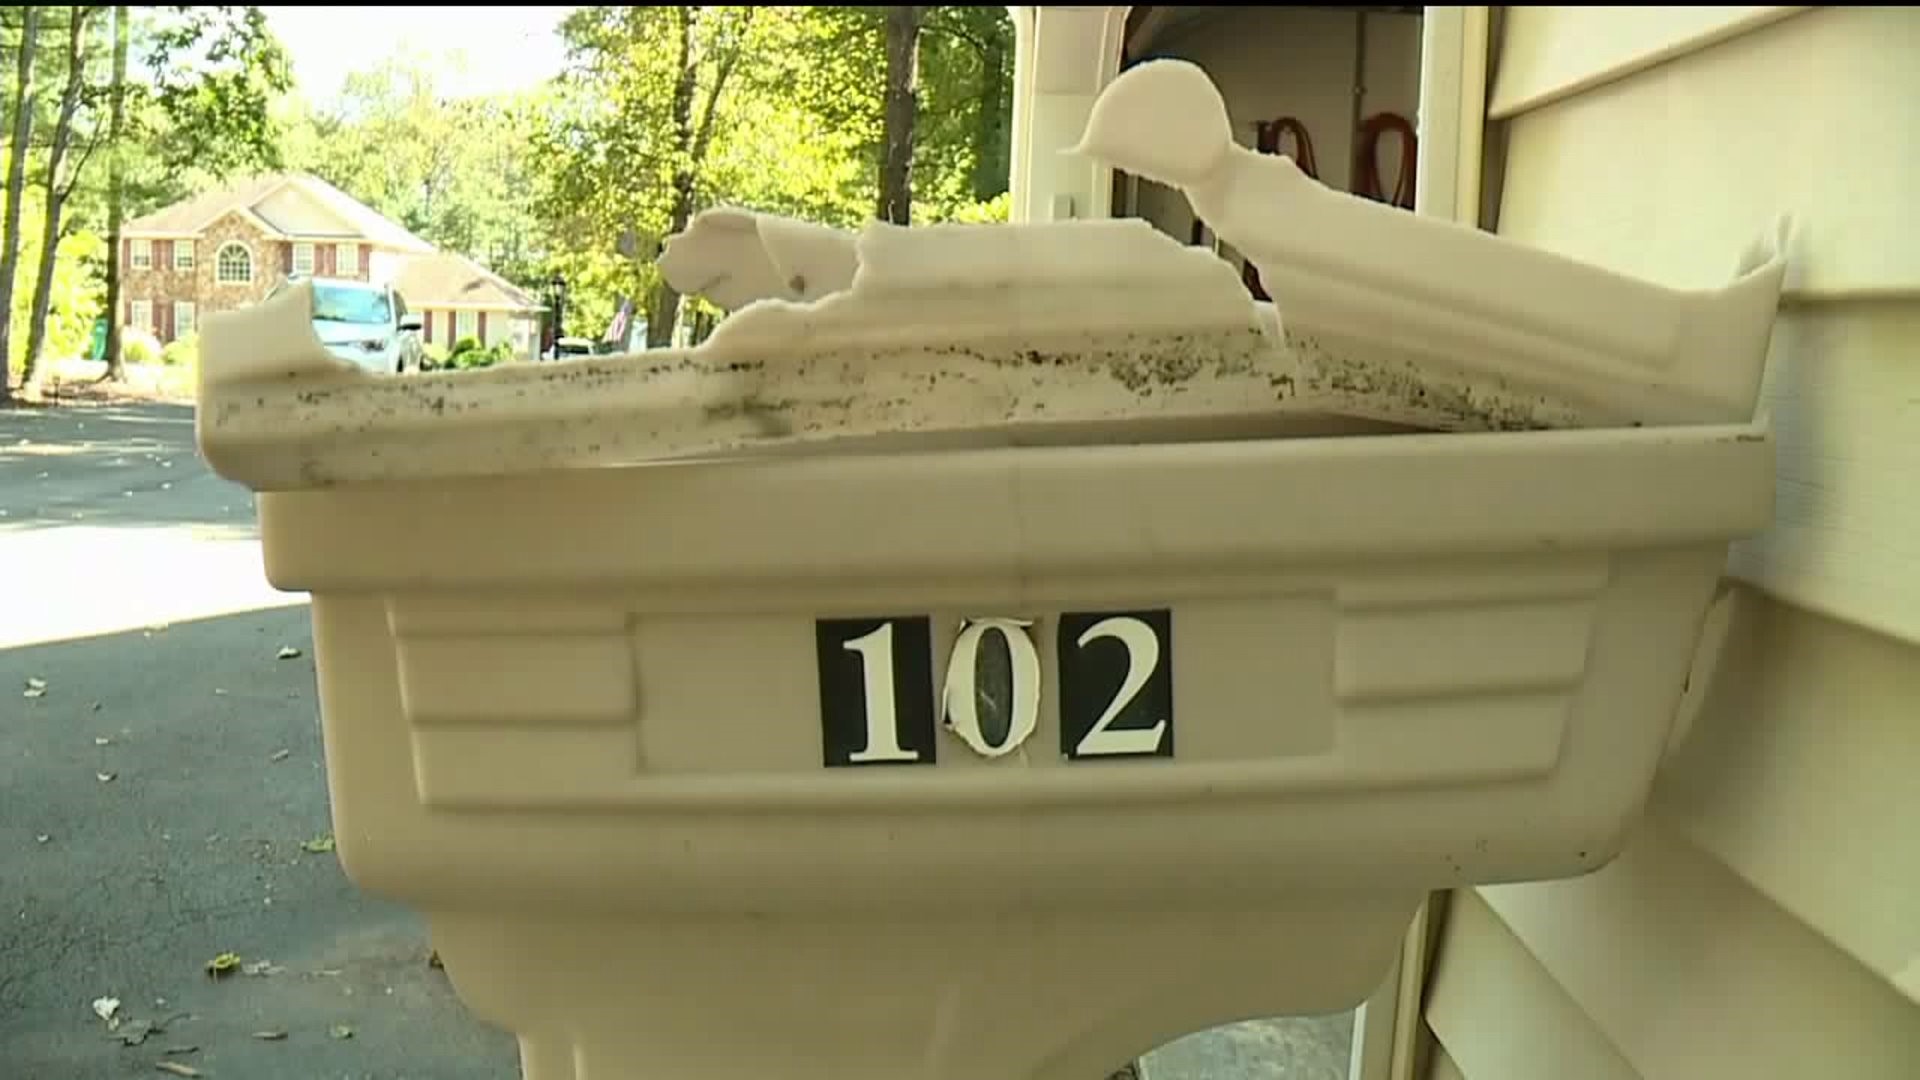 Vandals Blow up Mailboxes in the Poconos